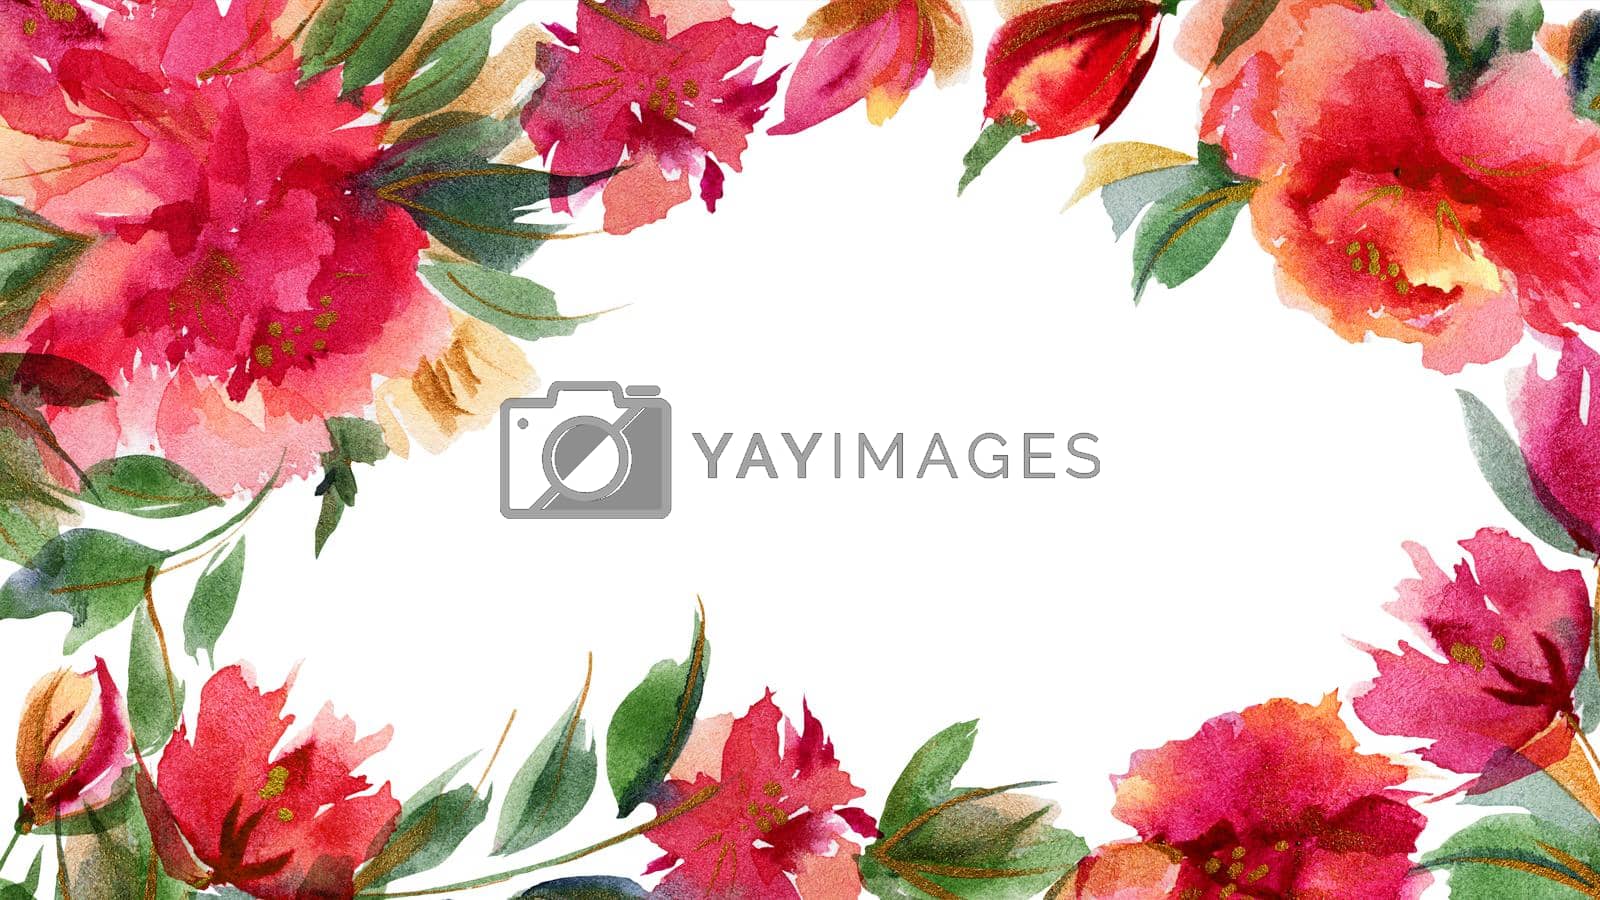 Royalty free image of Pink Peony botanical watercolor background by Xeniasnowstorm